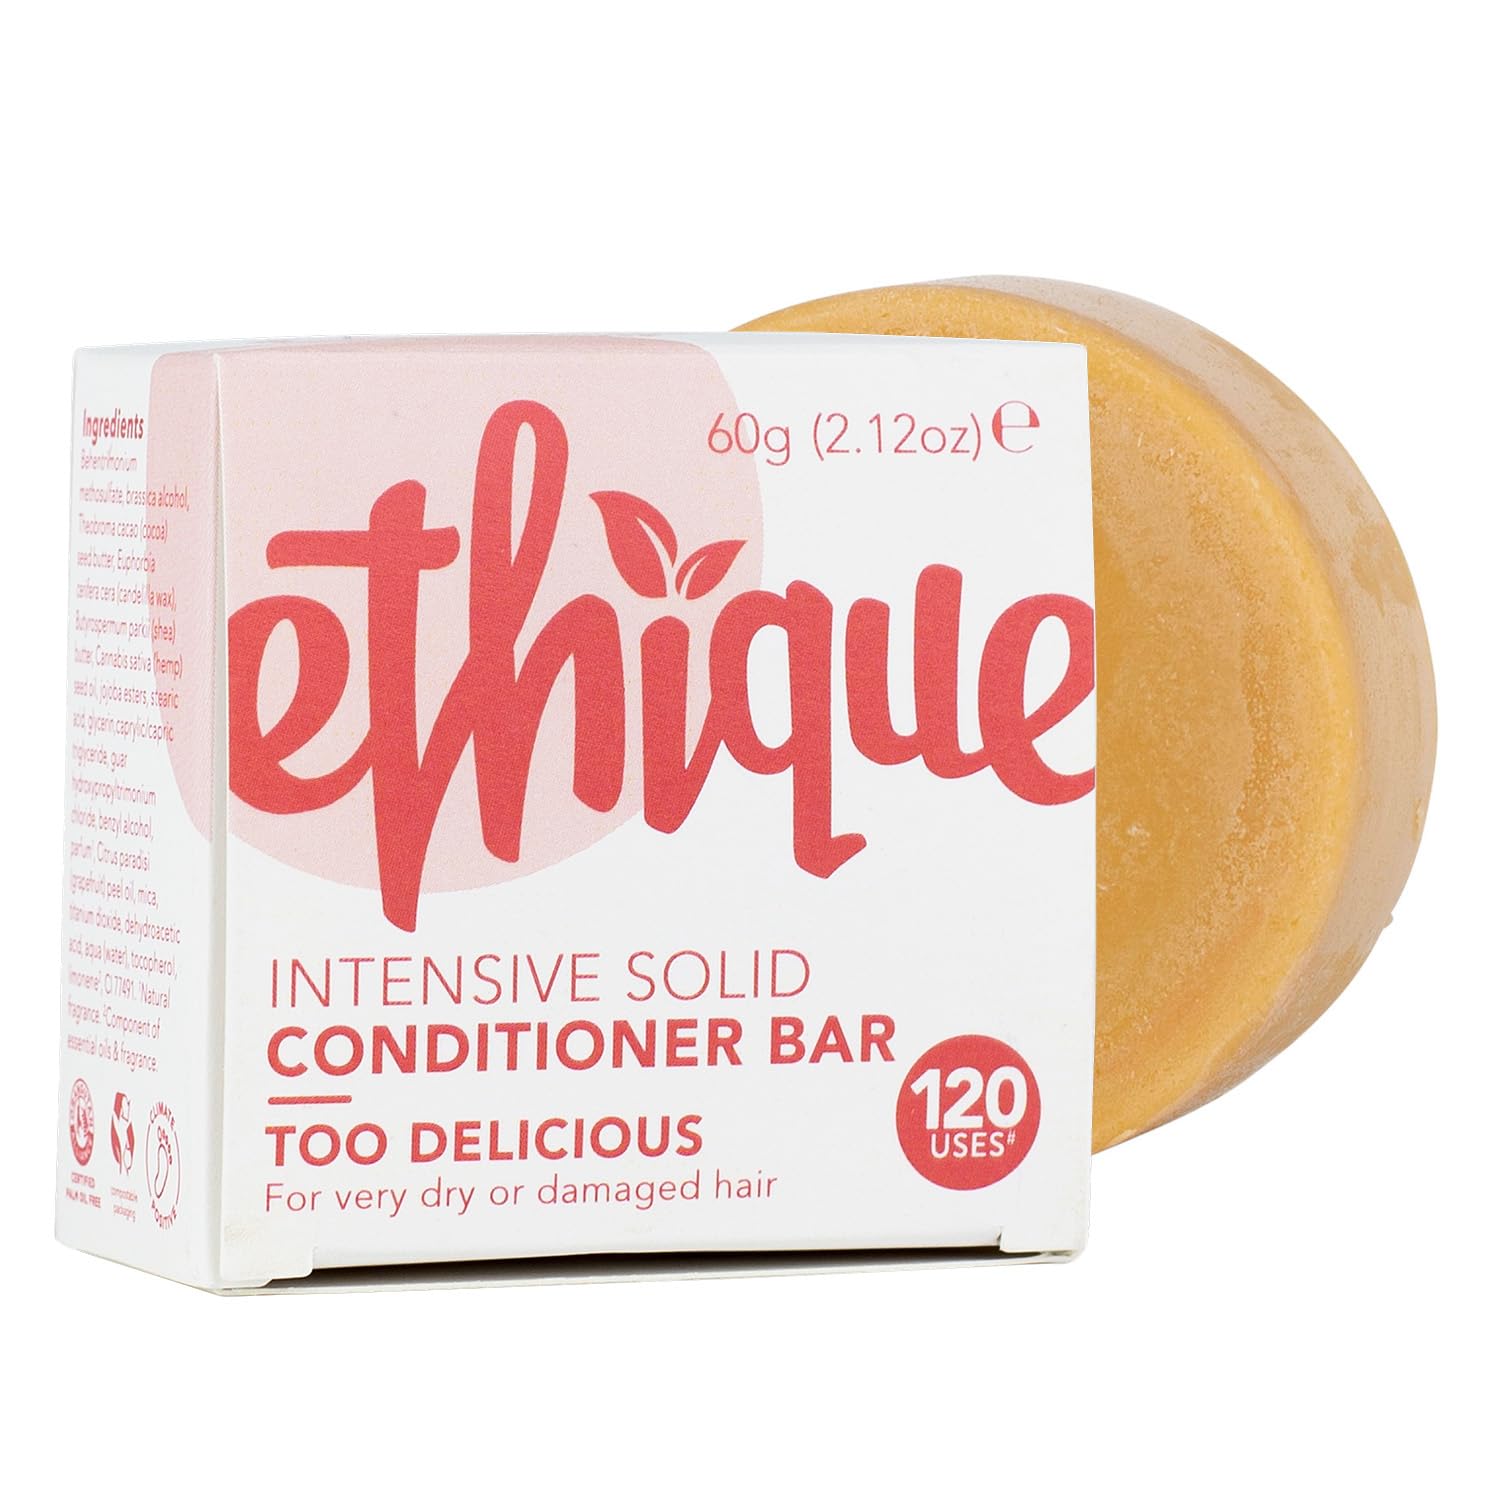 Ethique Conditioner Bar for Dry and Damaged Hair - Too Delicious |Paraben Free, Sulfate Free, Vegan, Cruely Free, 2.12 oz